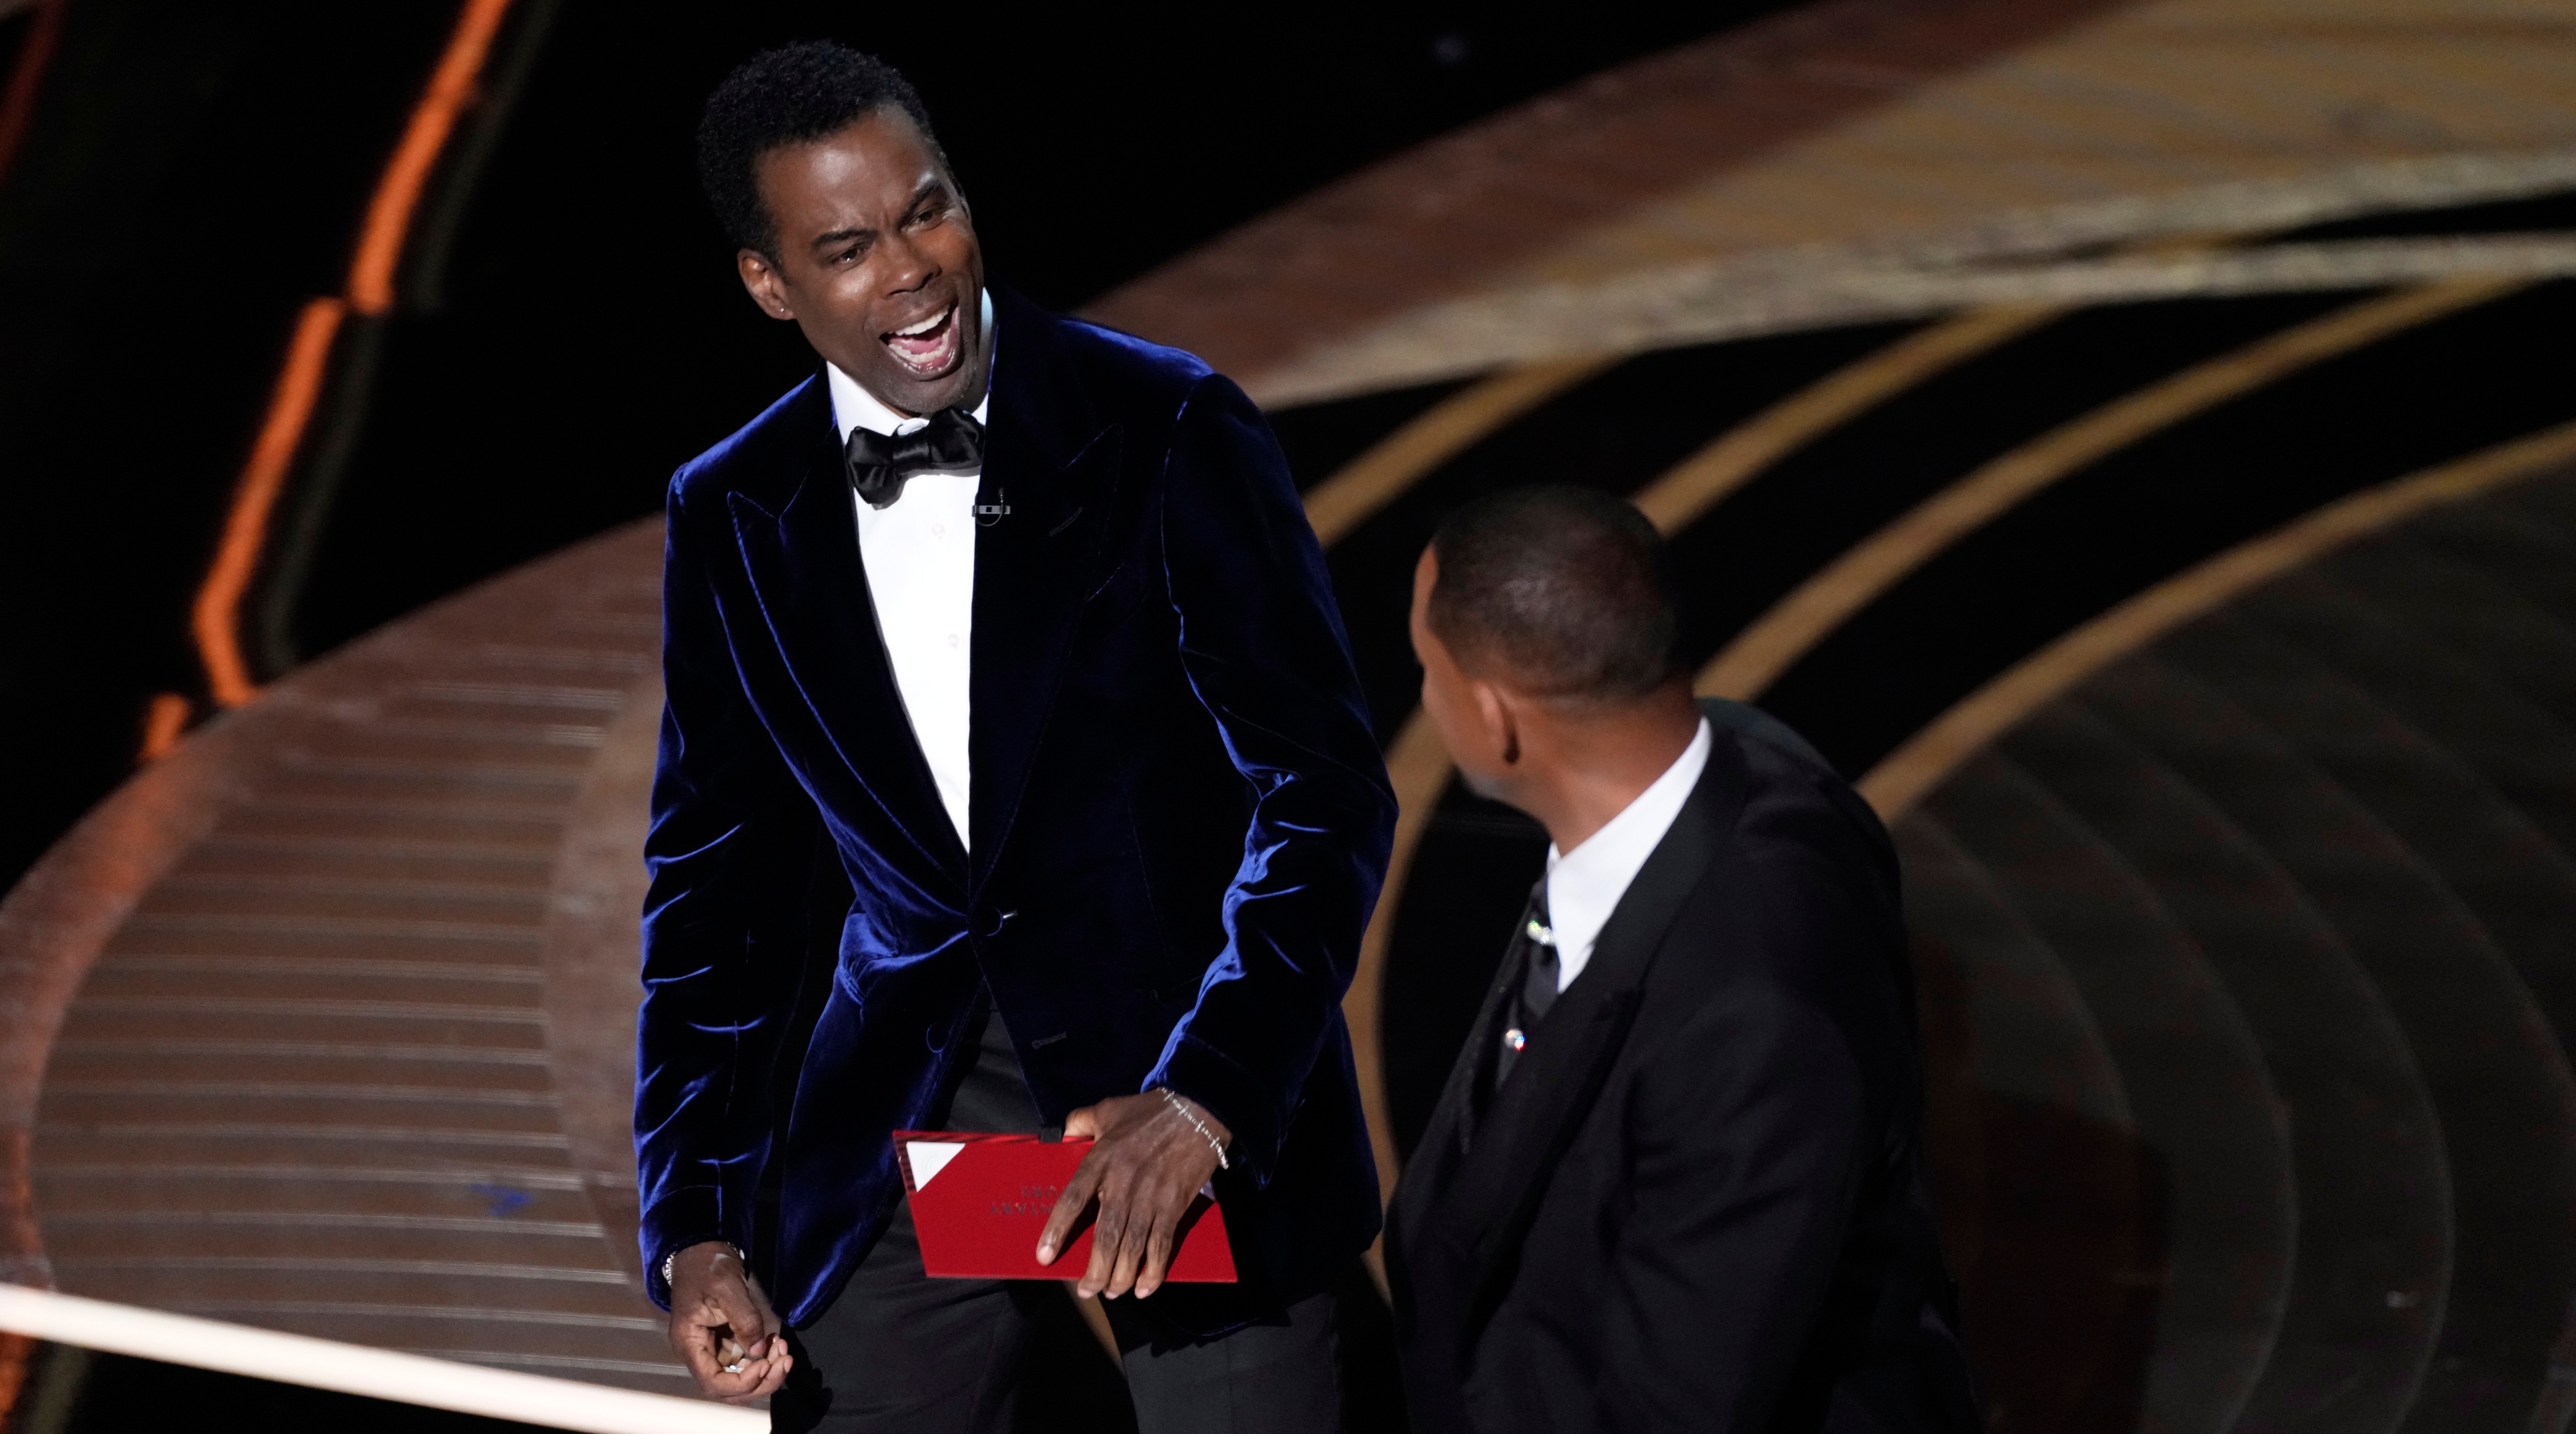 Will Smith, Chris Rock get into apparent altercation during Oscars: Sports world reacts